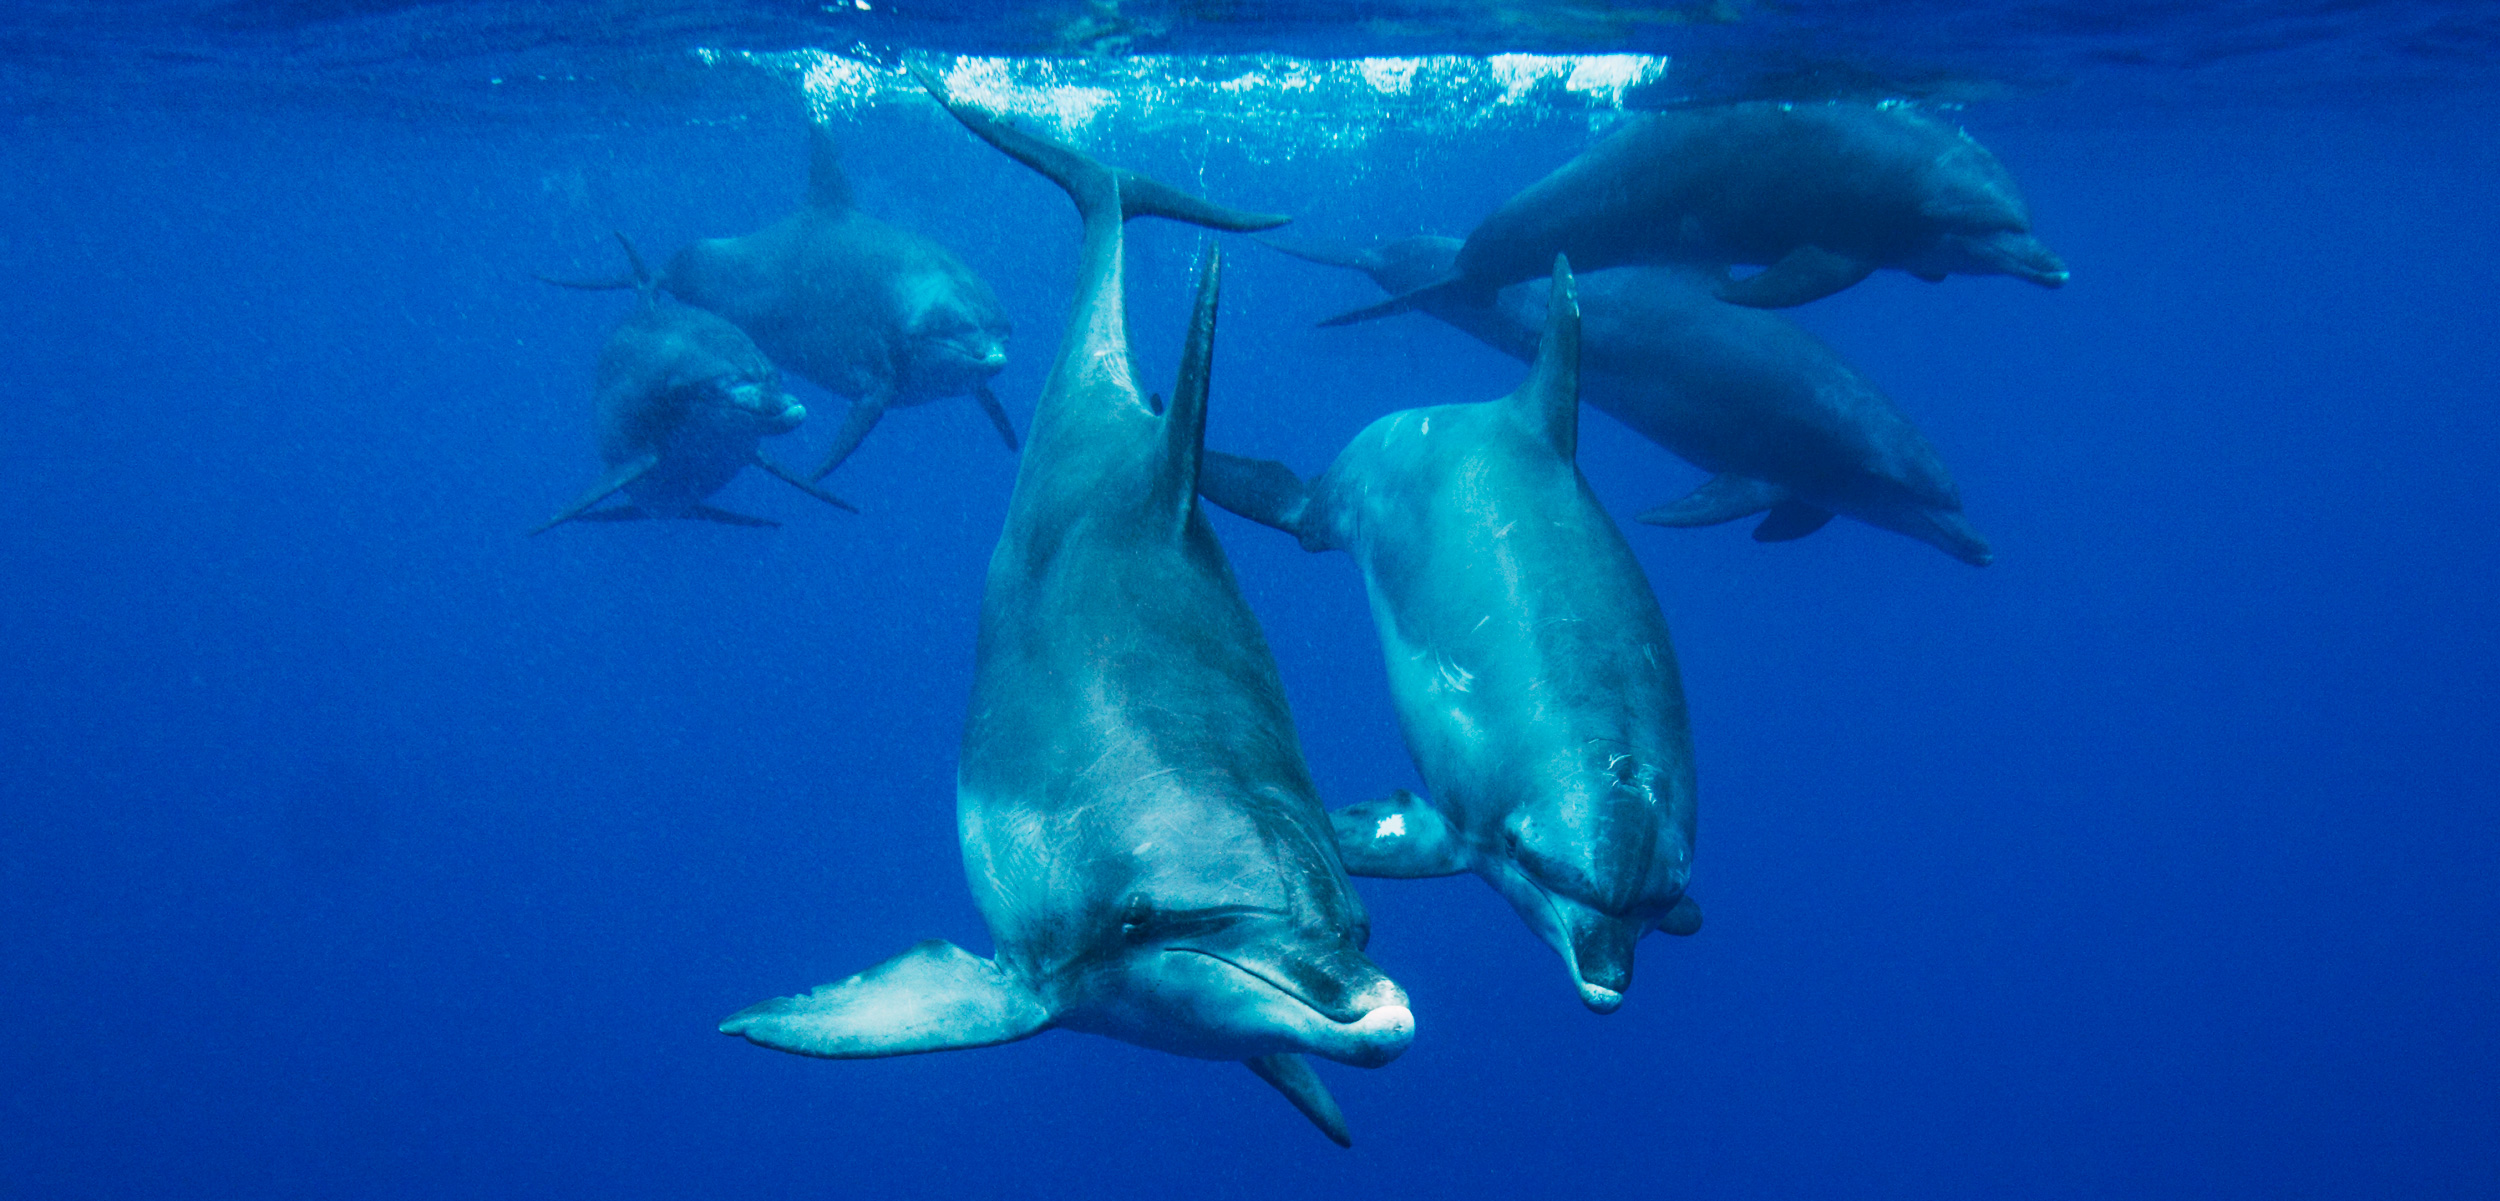 The stress of diving could tax dolphins and other marine mammals to the brink. Photo by Hiroya Minakuchi/Minden Pictures